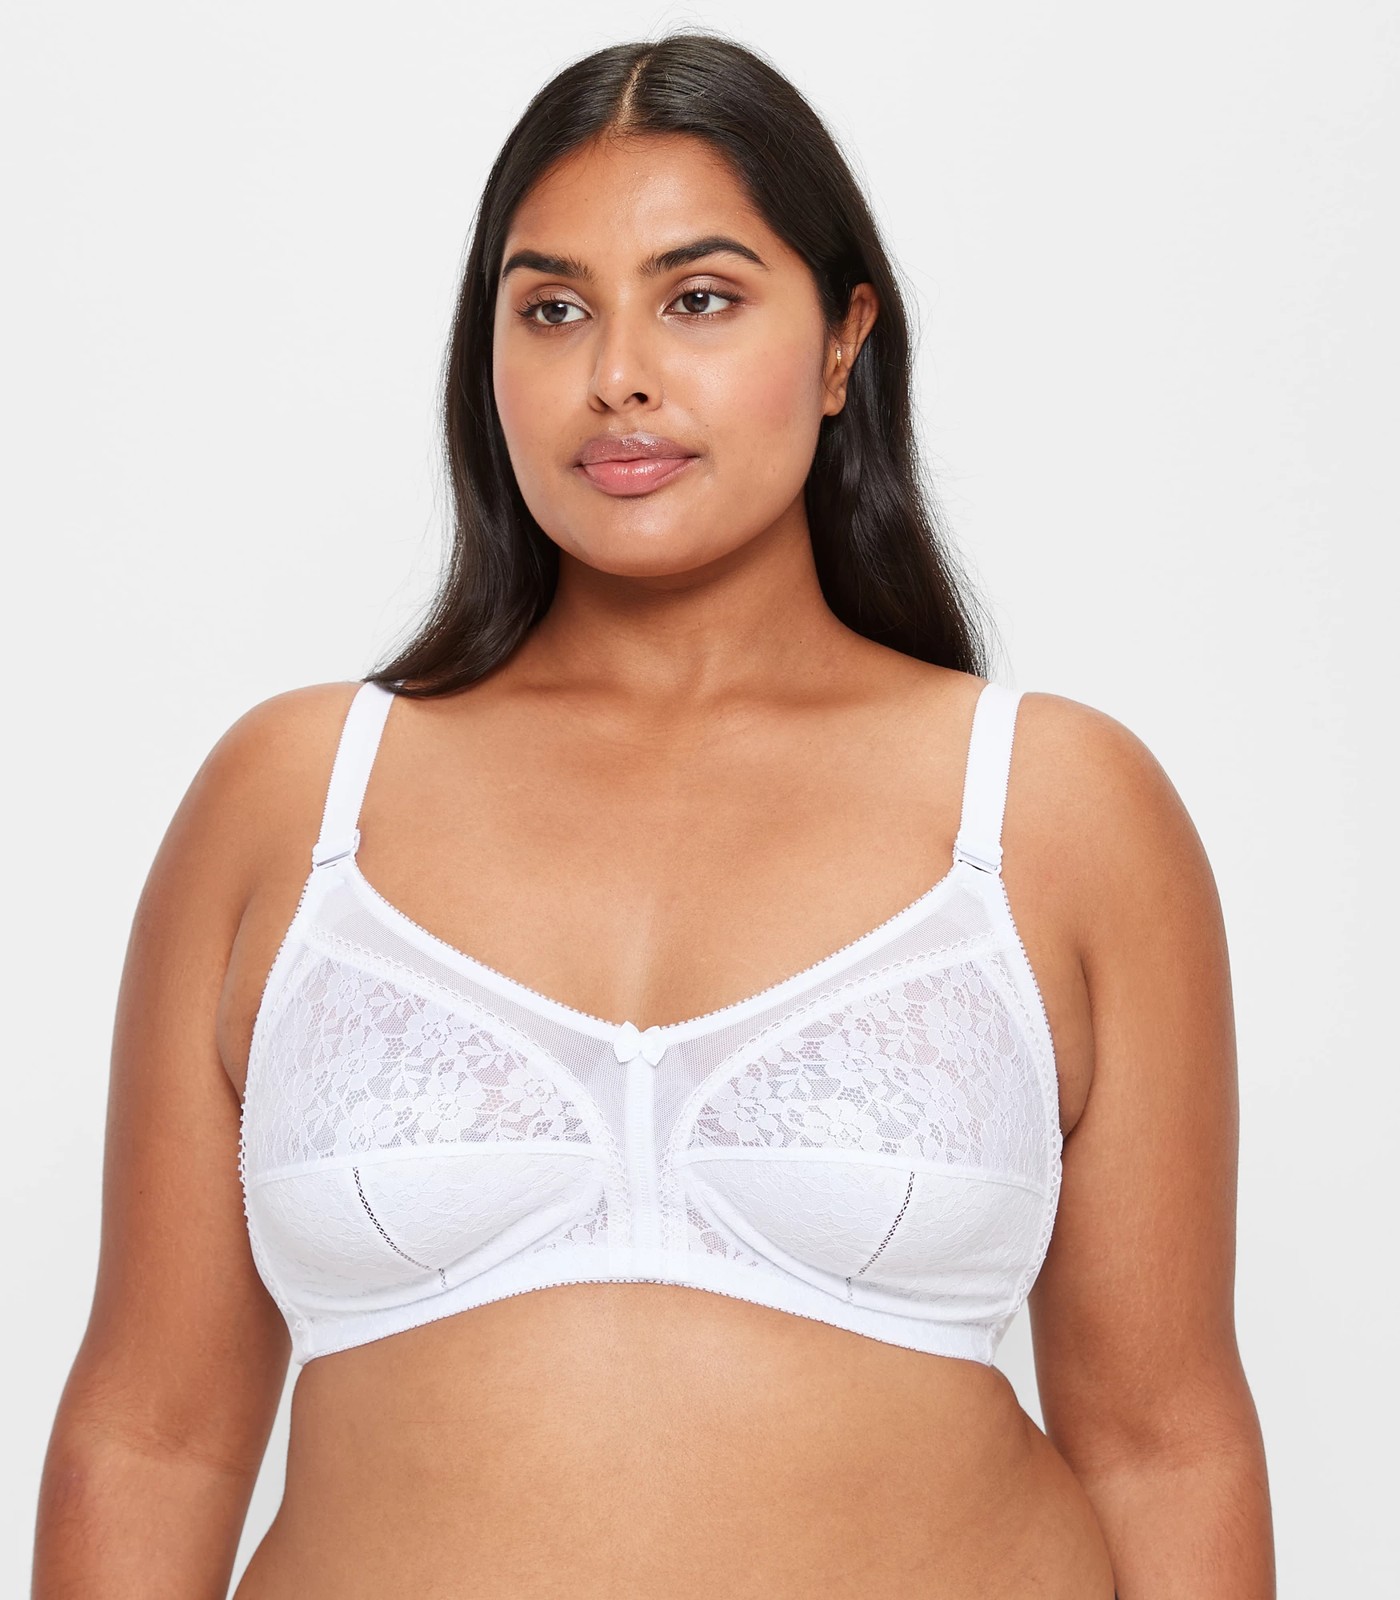 Plus Size Firm Support Wirefree Bra - White